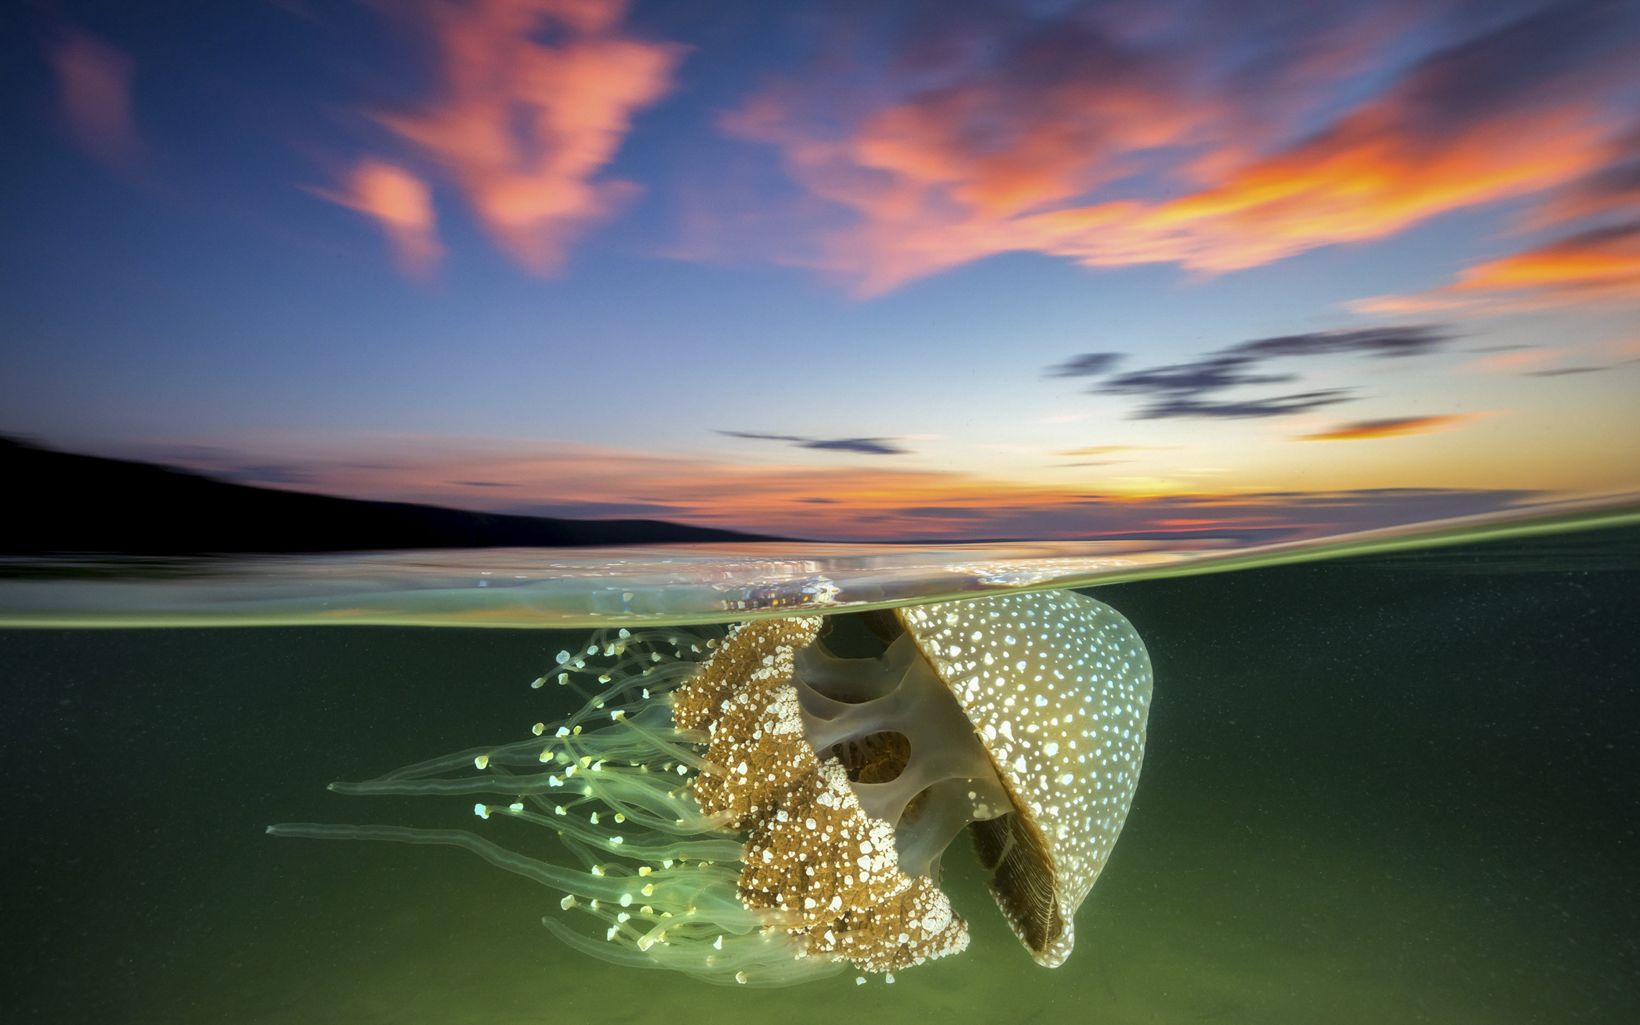 A White Spotted Jellyfish drifts effortlessly in the current as the sun sets over Jervis Bay.